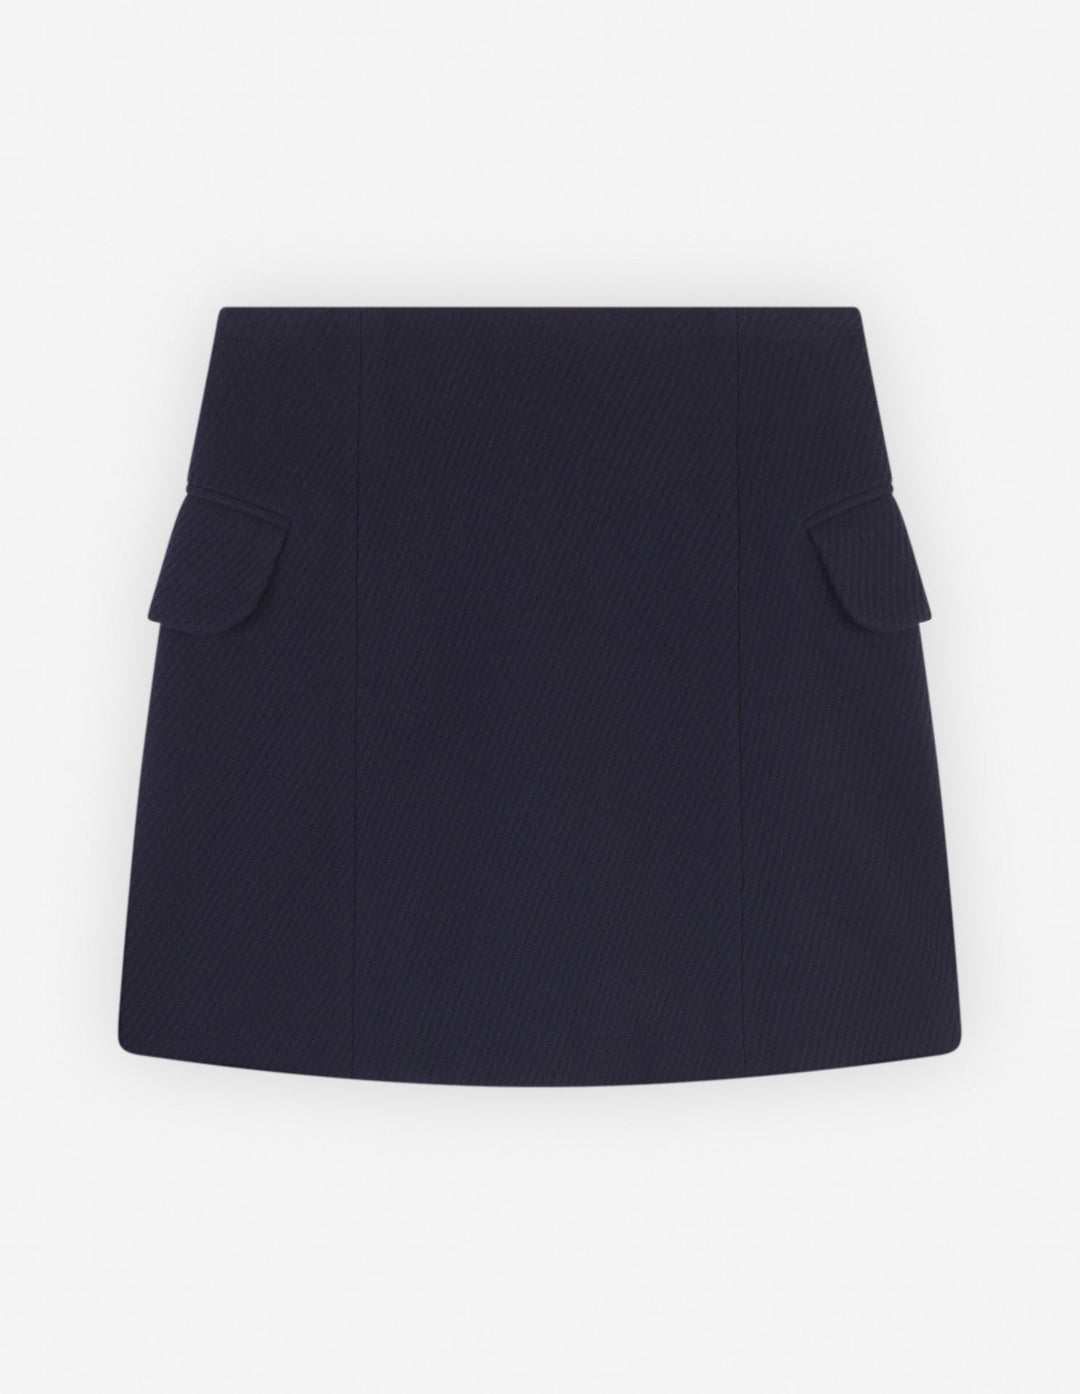 MINI A-LINE WRAP SKIRT IN TEXTURISED WOOL BLEND TW